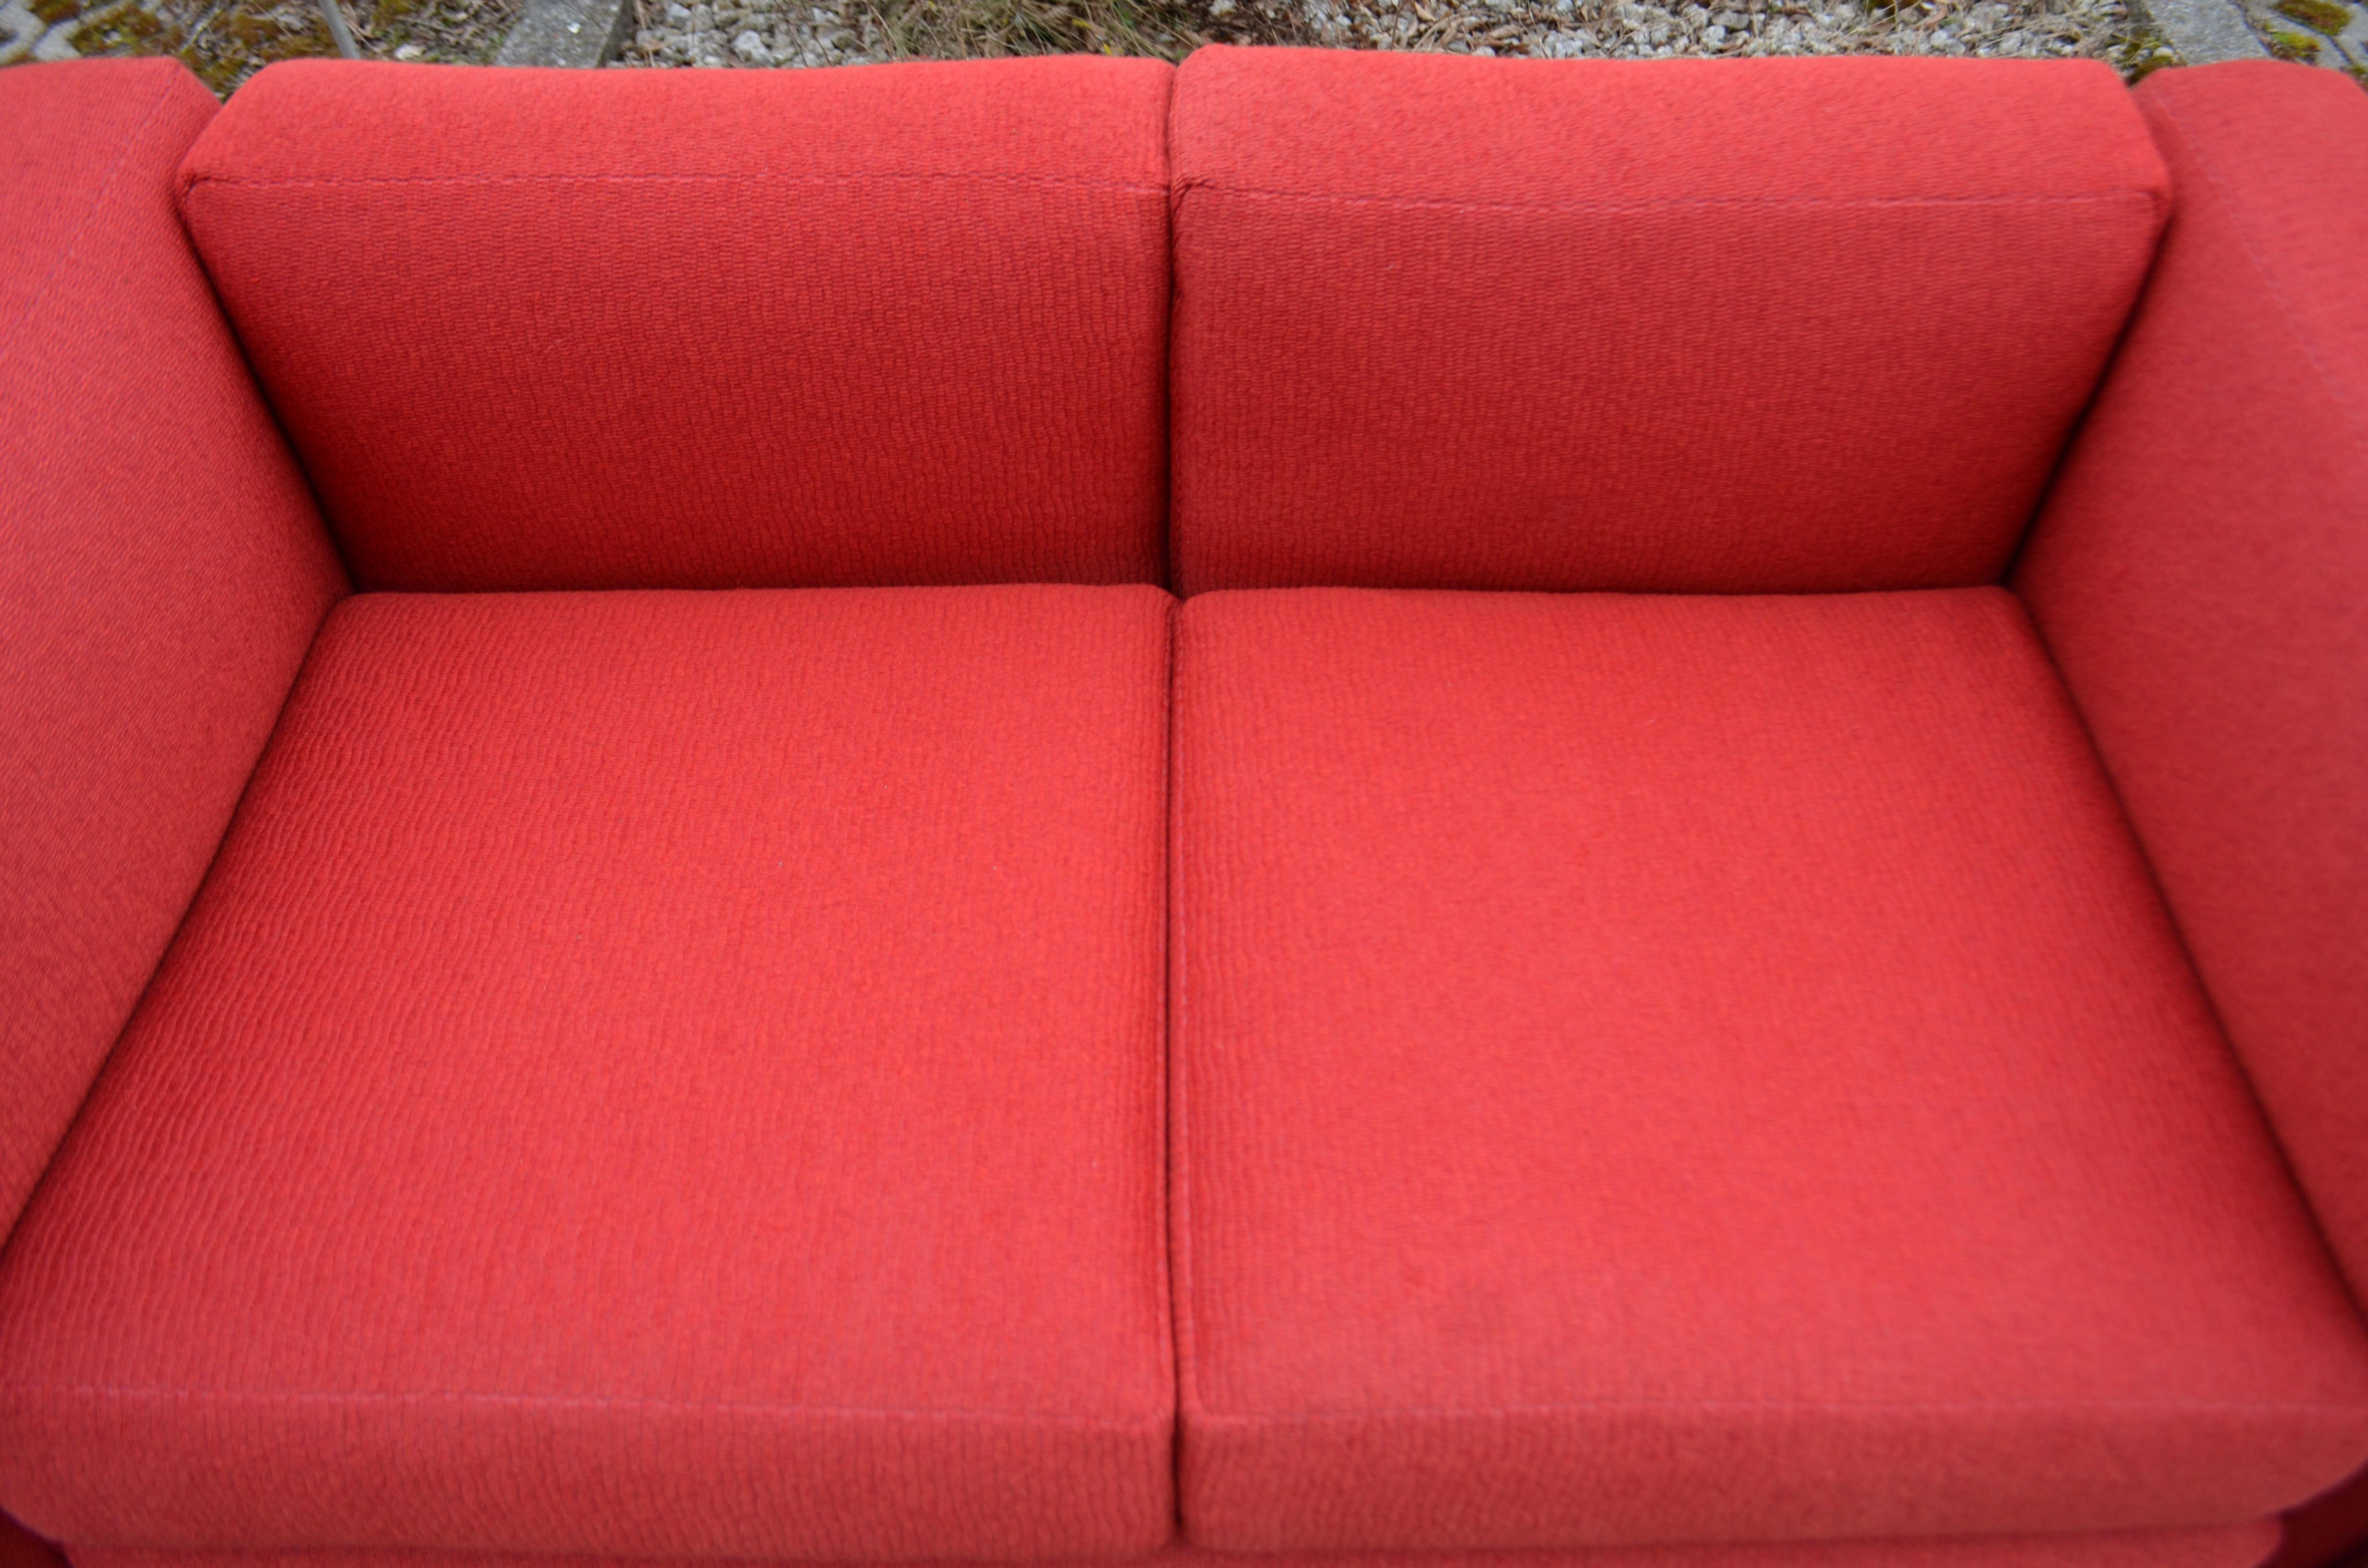 This LC2 two-seat sofa in red fabric was designed by Le Corbusier and produced by Cassina.
It features a classic chrome tubular steel frame. 
The fabric is a red structural luxury fabric and was covered some years ago.
Also the completely pillows